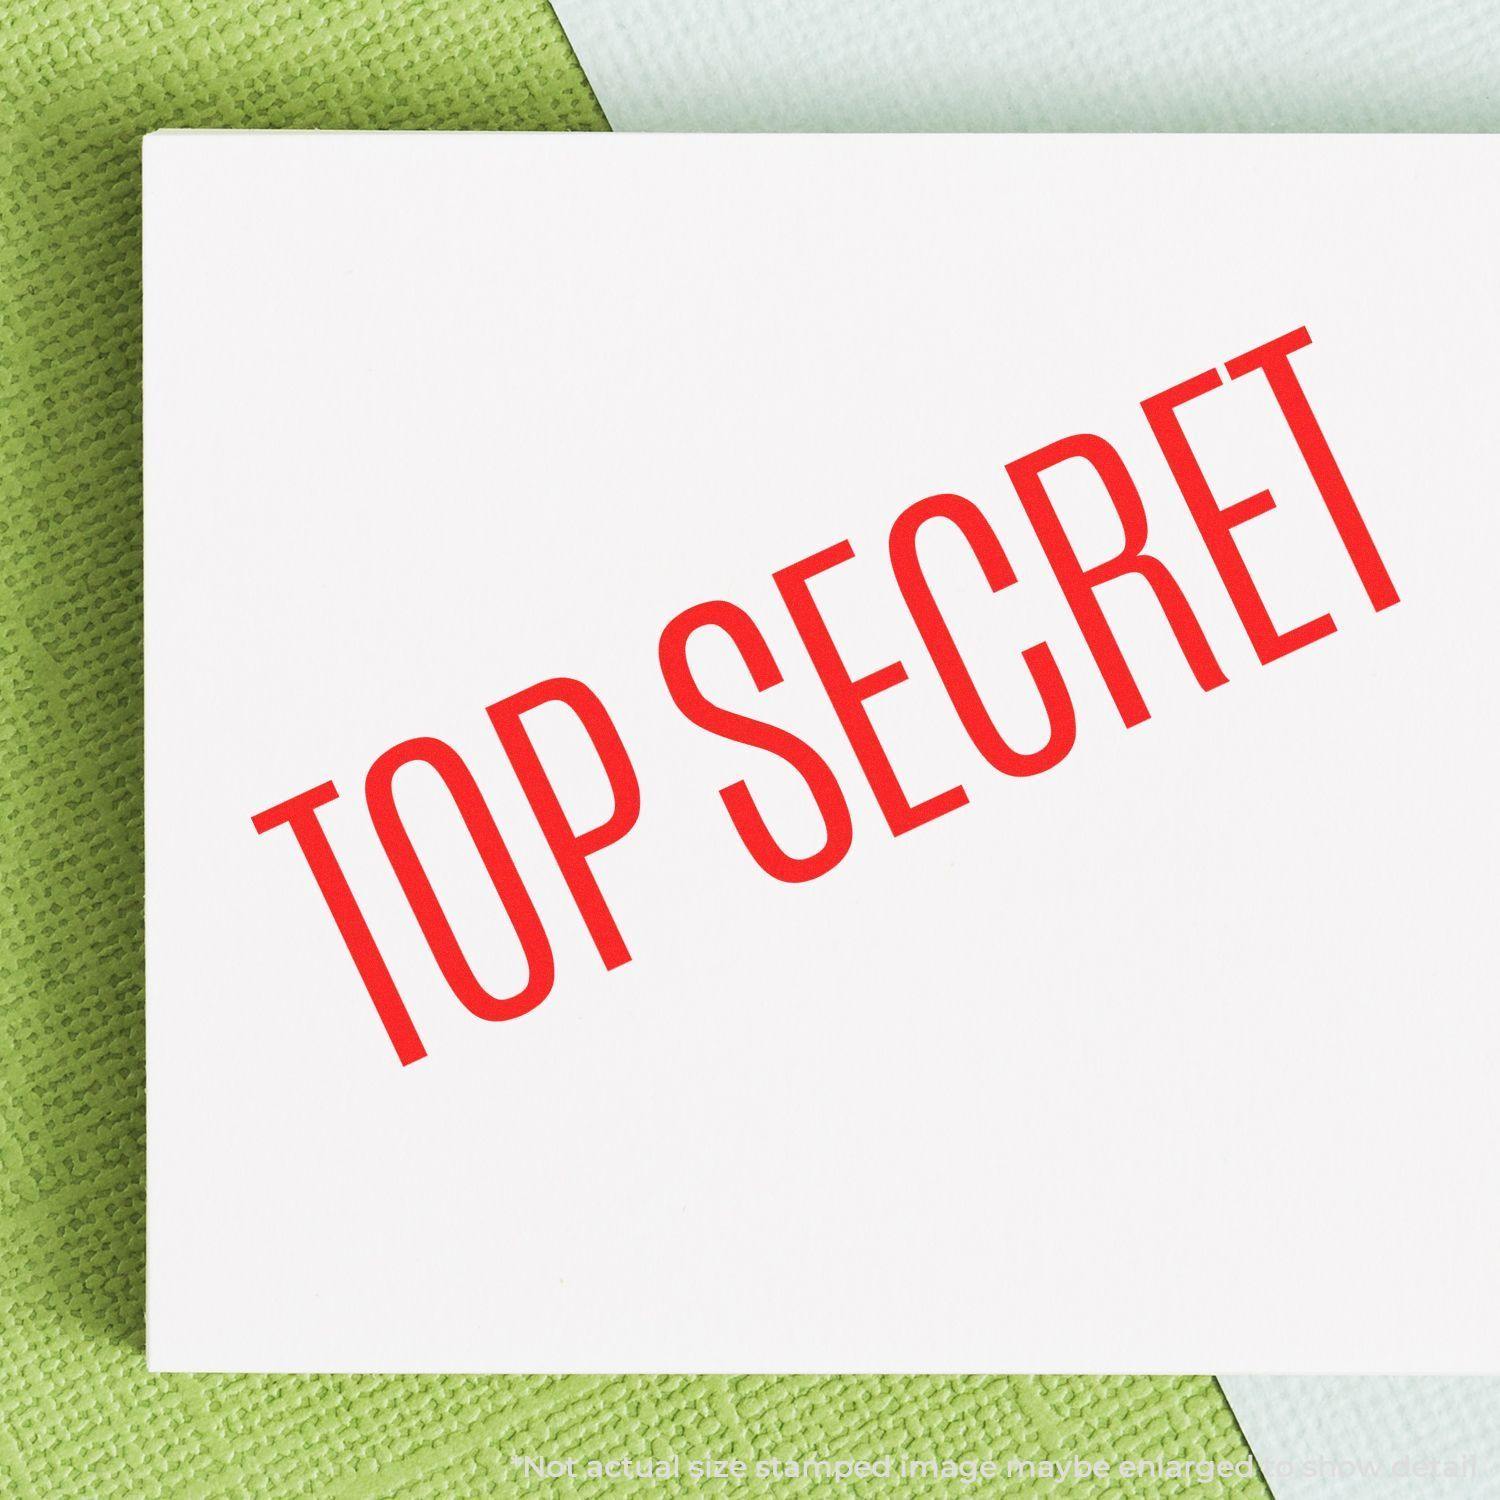 A stock office rubber stamp with a stamped image showing how the text "TOP SECRET" in a large font is displayed after stamping.